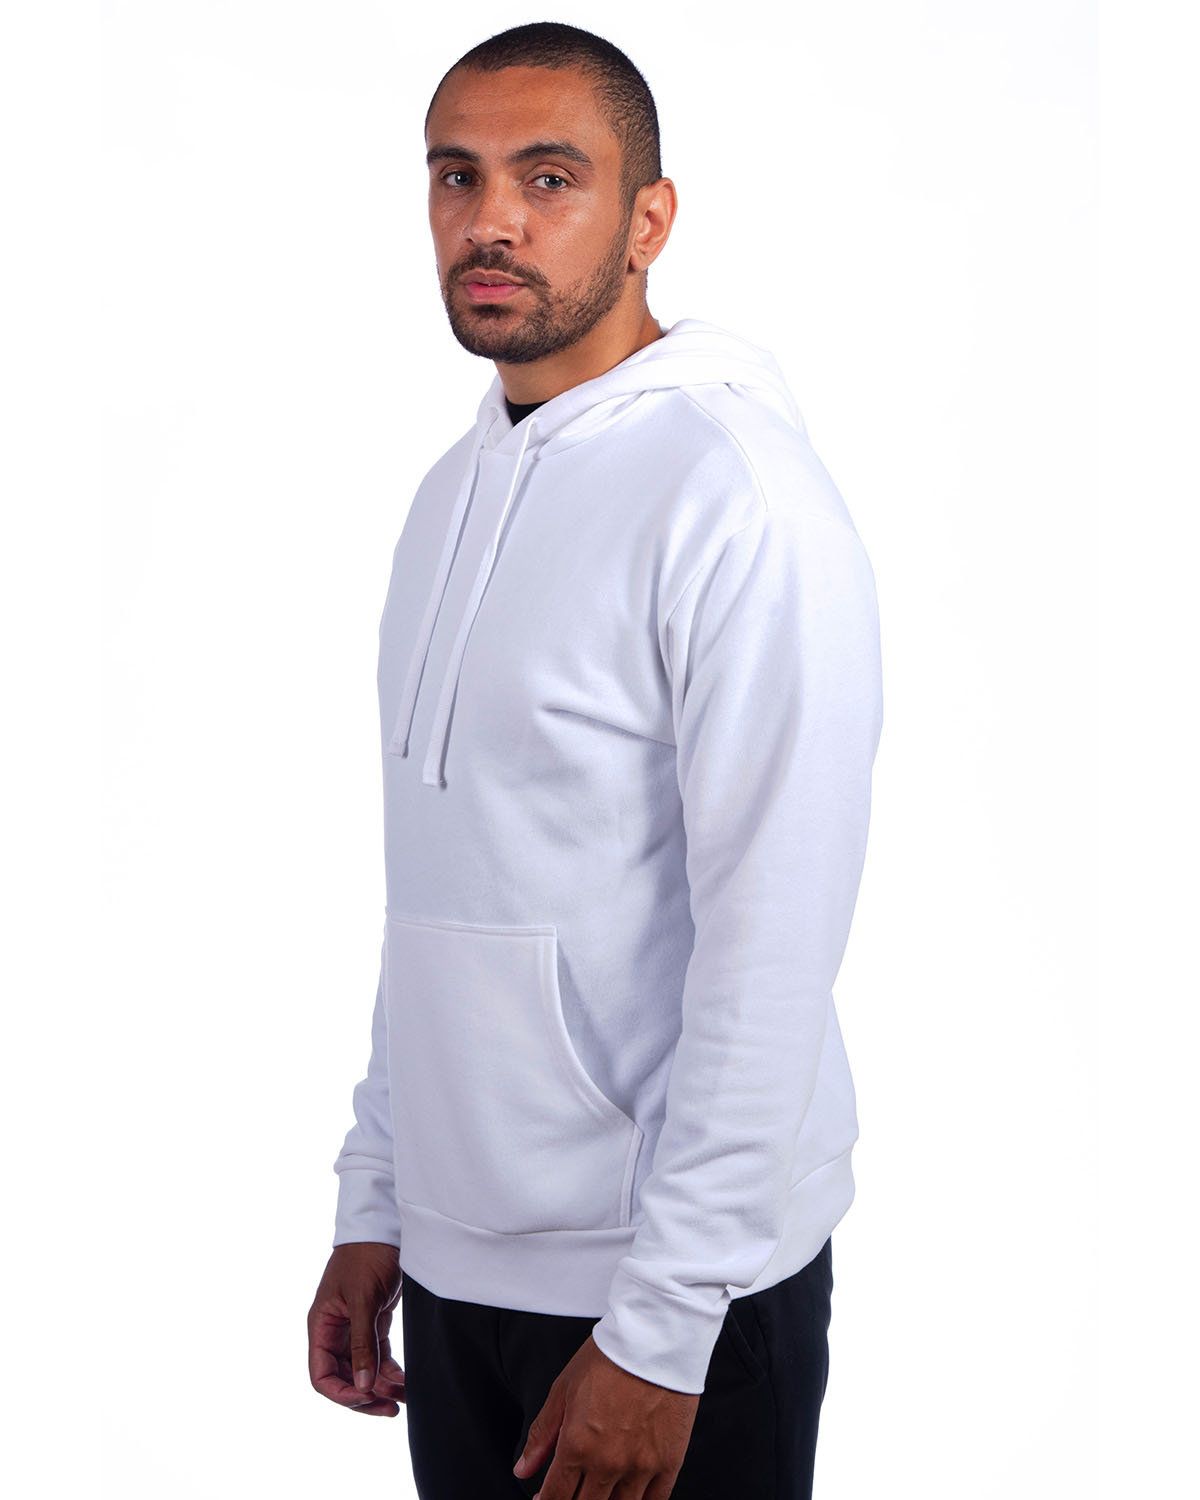 'Next Level 9304 Adult Sueded French Terry Pullover Sweatshirt'